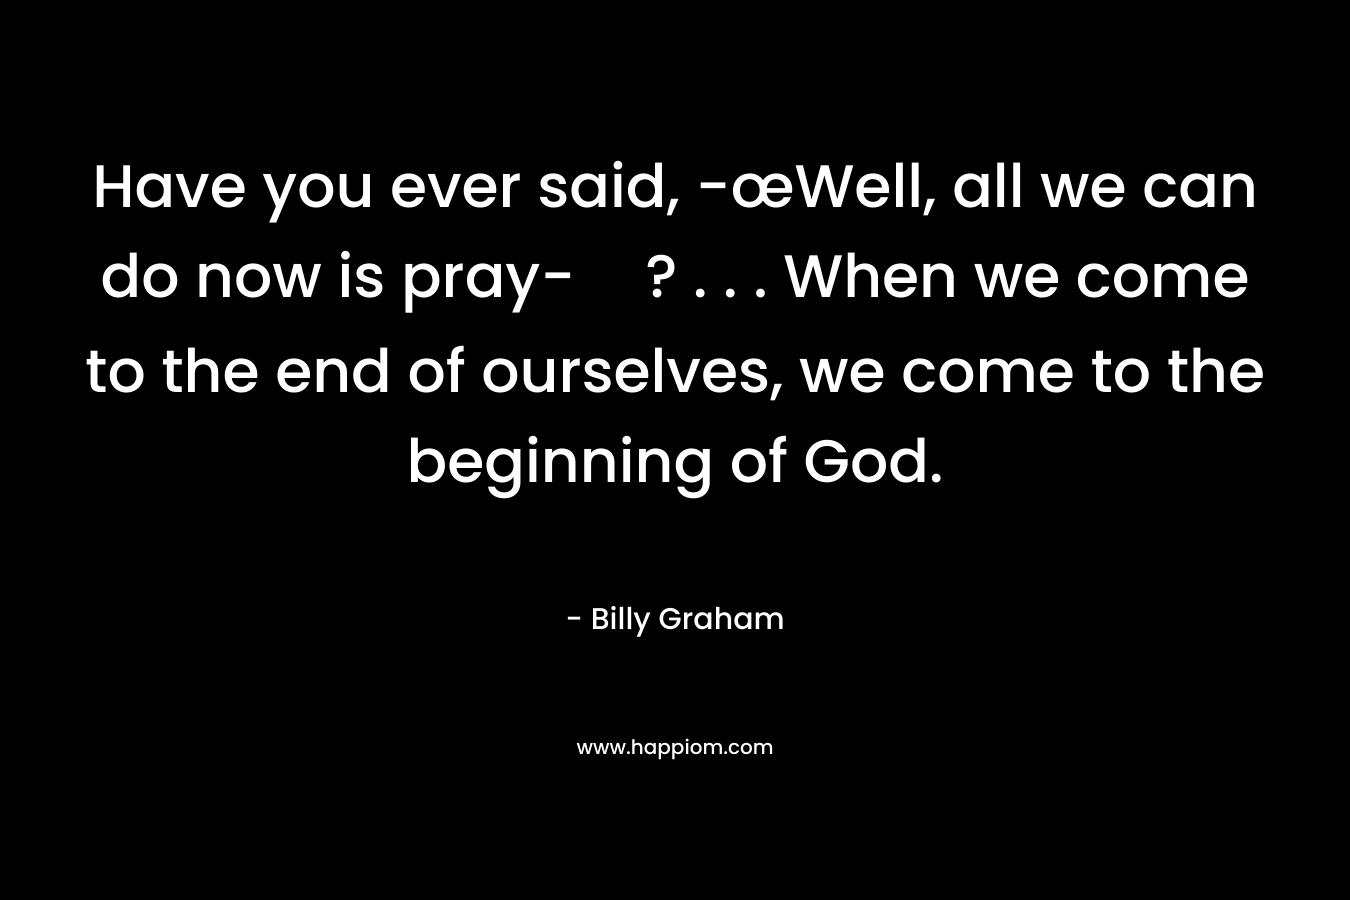 Have you ever said, -œWell, all we can do now is pray-? . . . When we come to the end of ourselves, we come to the beginning of God.